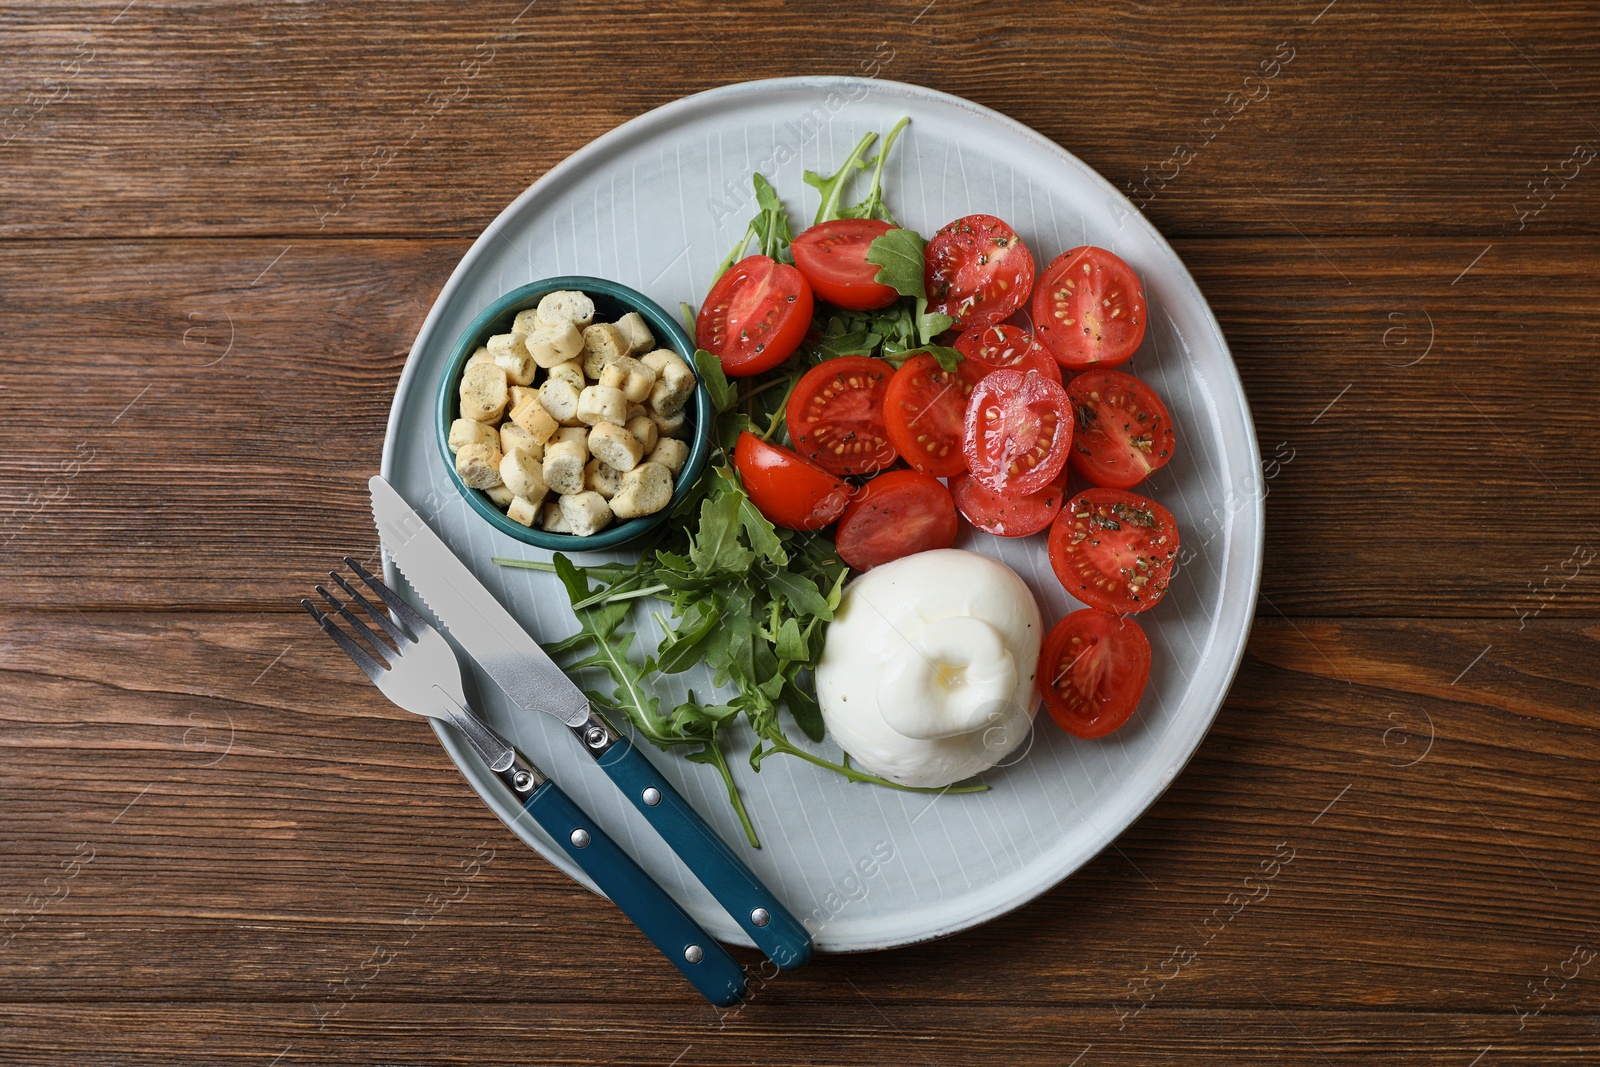 Photo of Delicious burrata cheese with tomatoes and arugula served on wooden table, top view